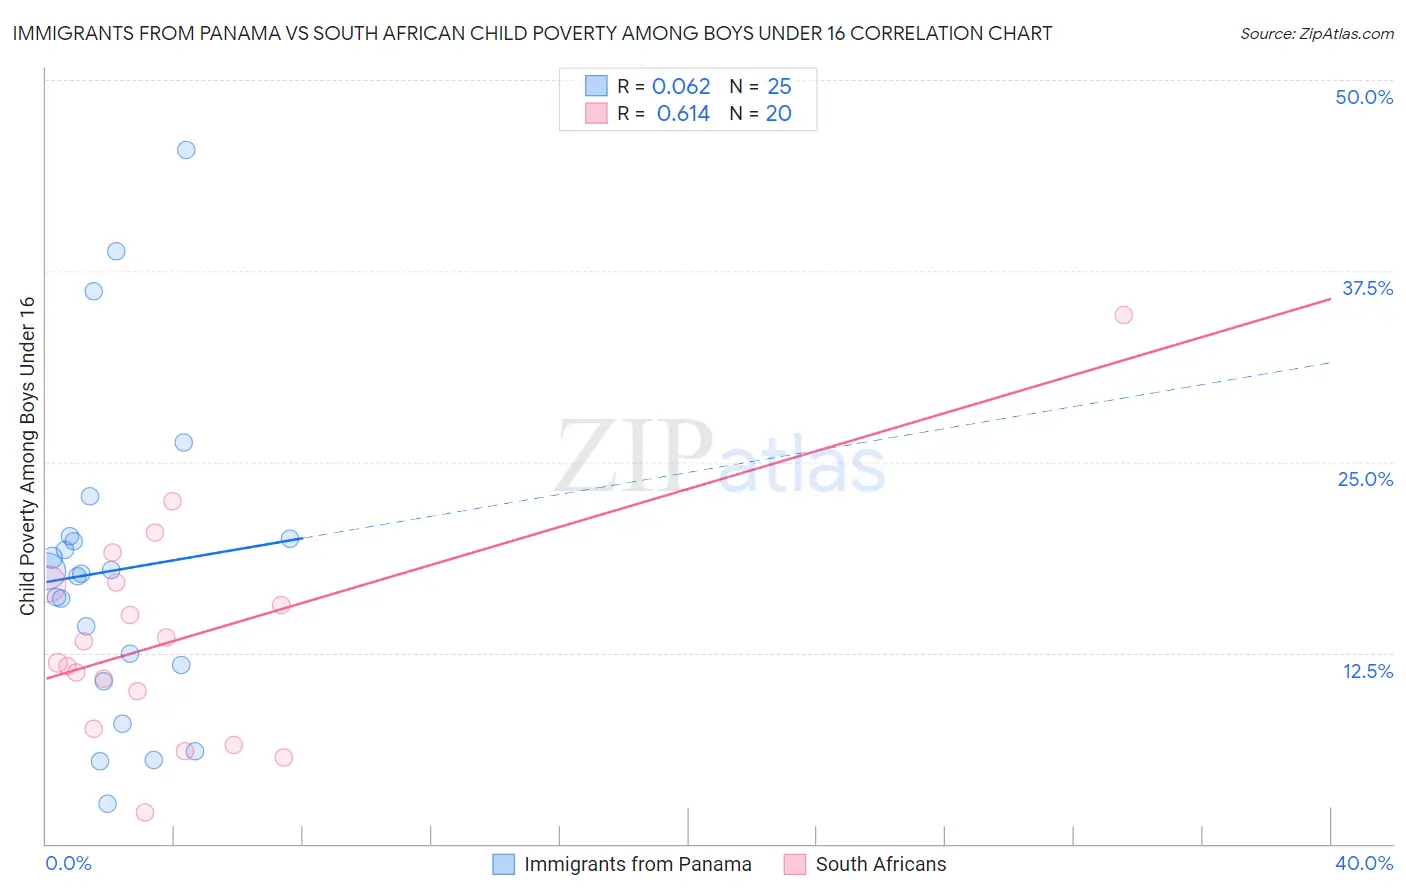 Immigrants from Panama vs South African Child Poverty Among Boys Under 16